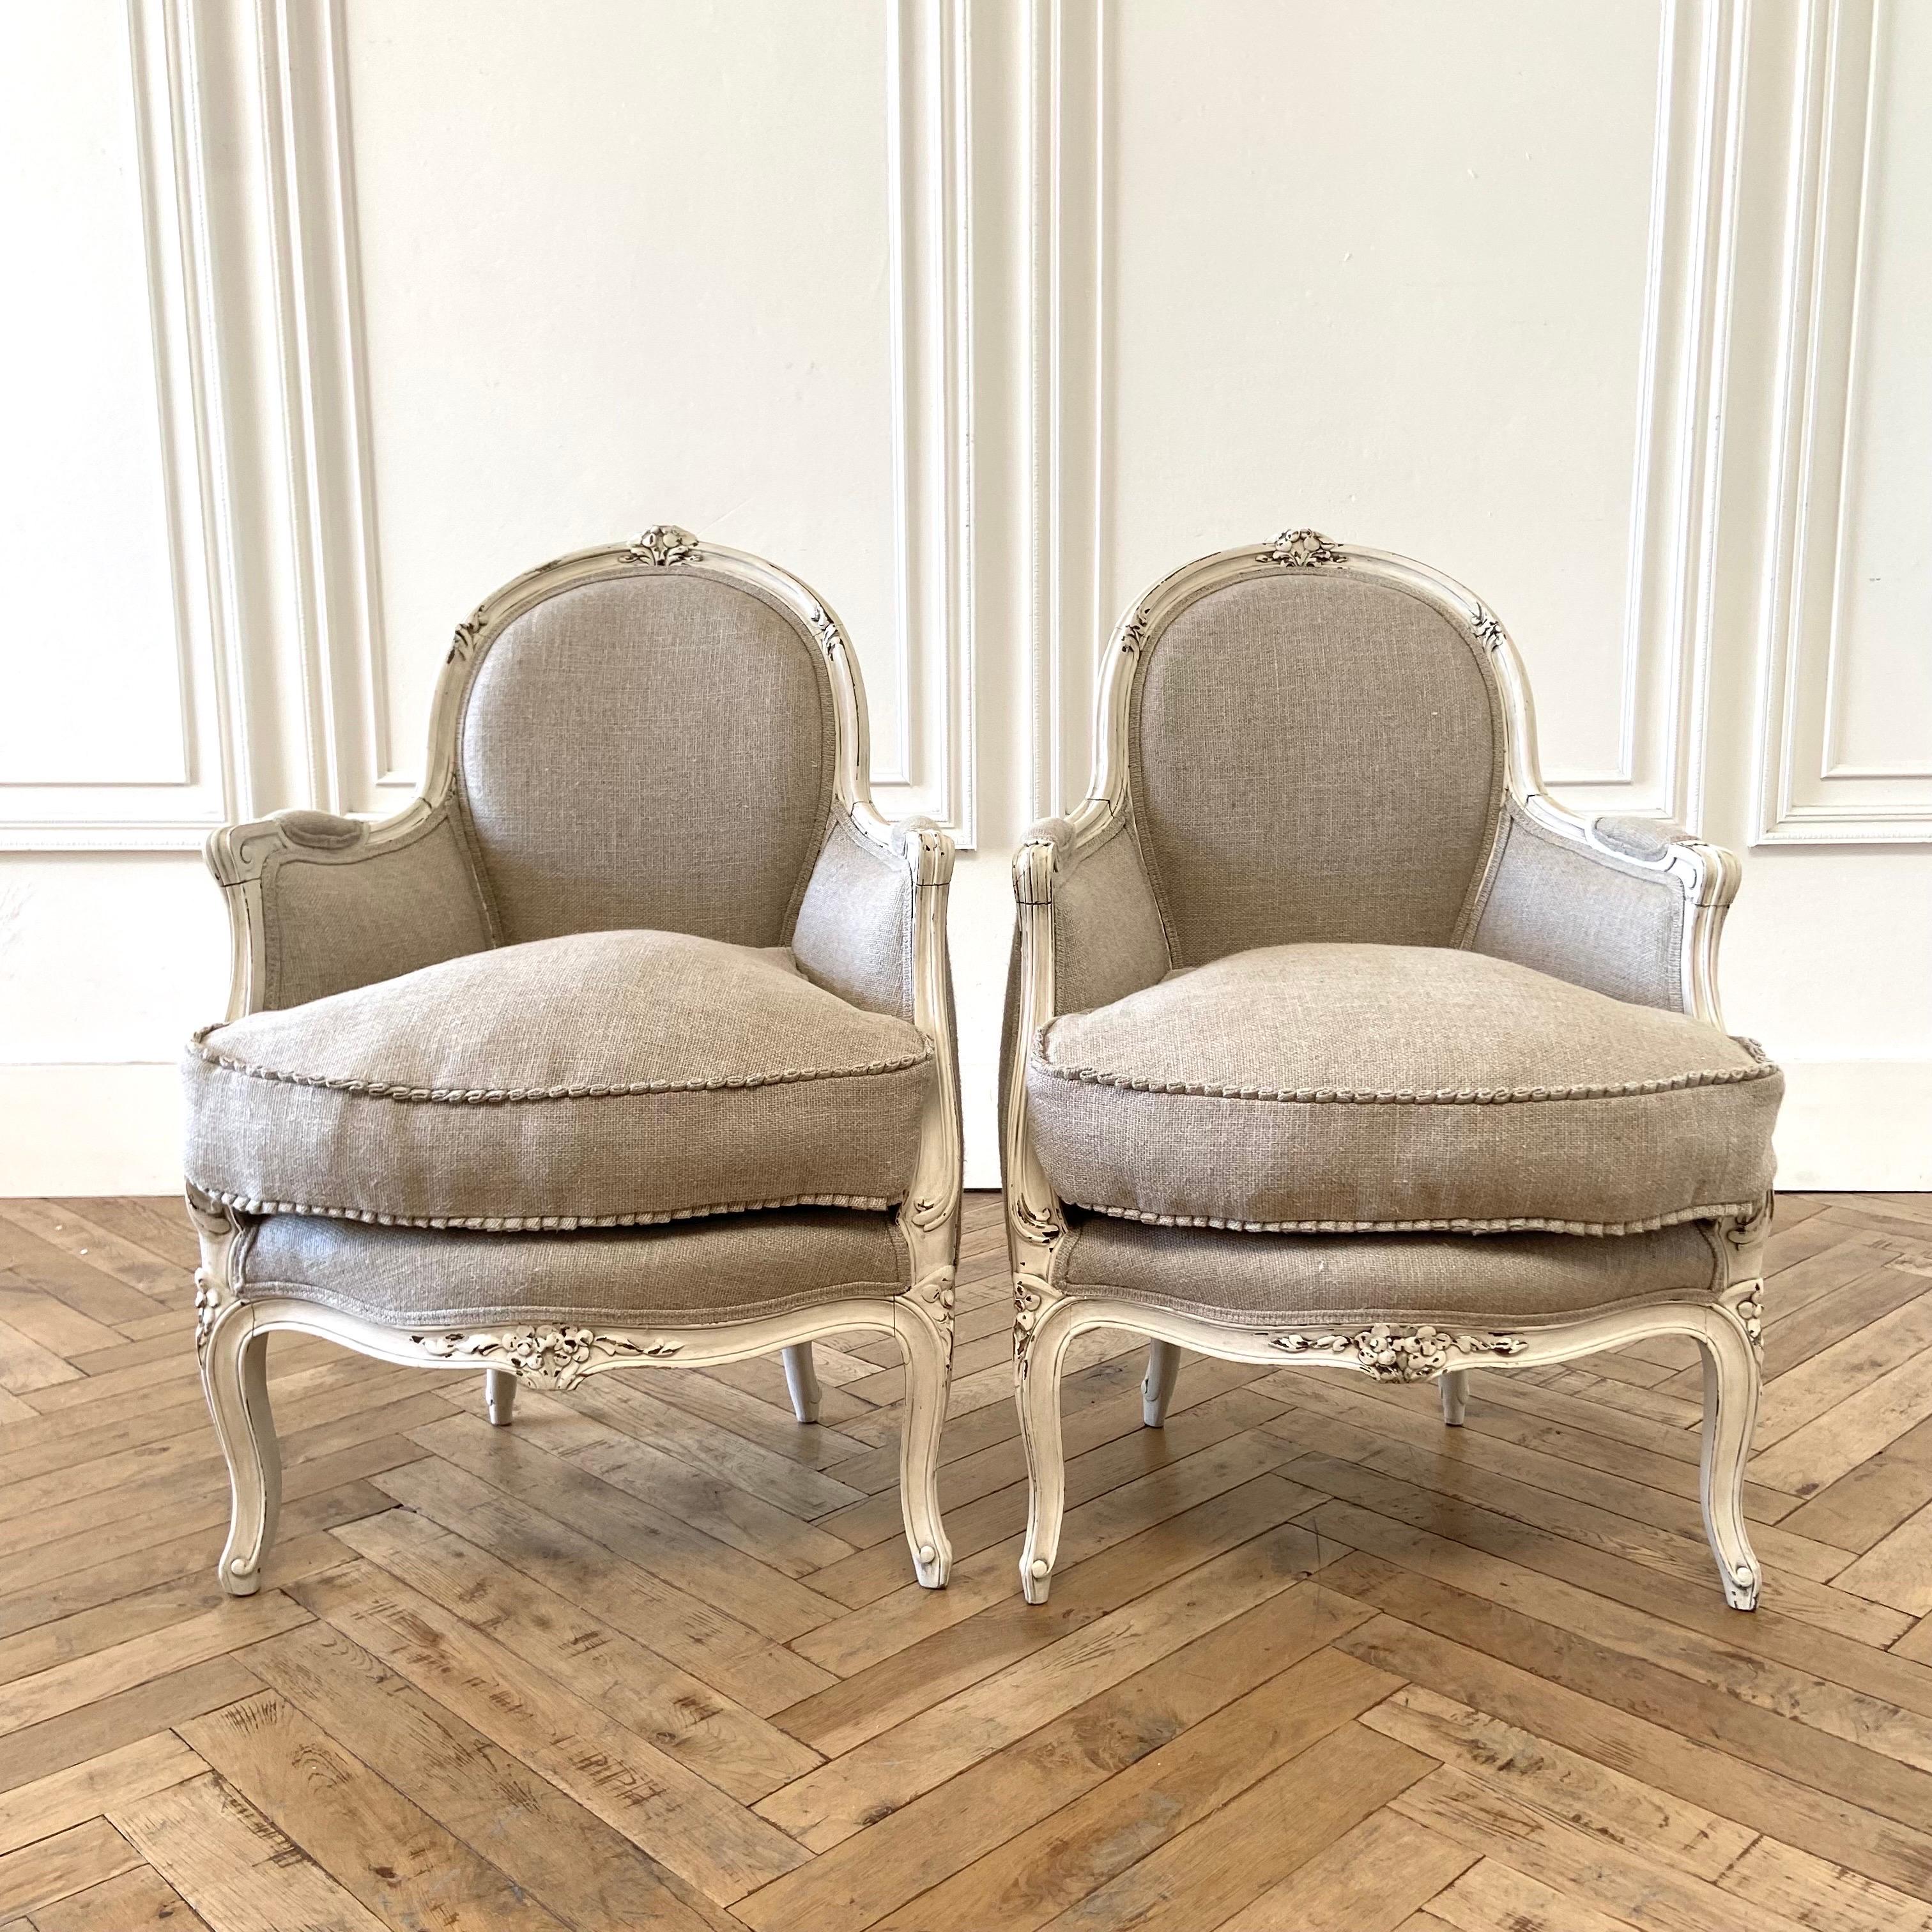 Pair of painted and upholstered 19th century French Louis XV Style bergere chairs 24” W x 24” D x 35” H
SH: 18”. SD: 18”
Painted in our custom oyster white finish with subtle distressed edges, and antique patina. New upholstery in a 100% pure